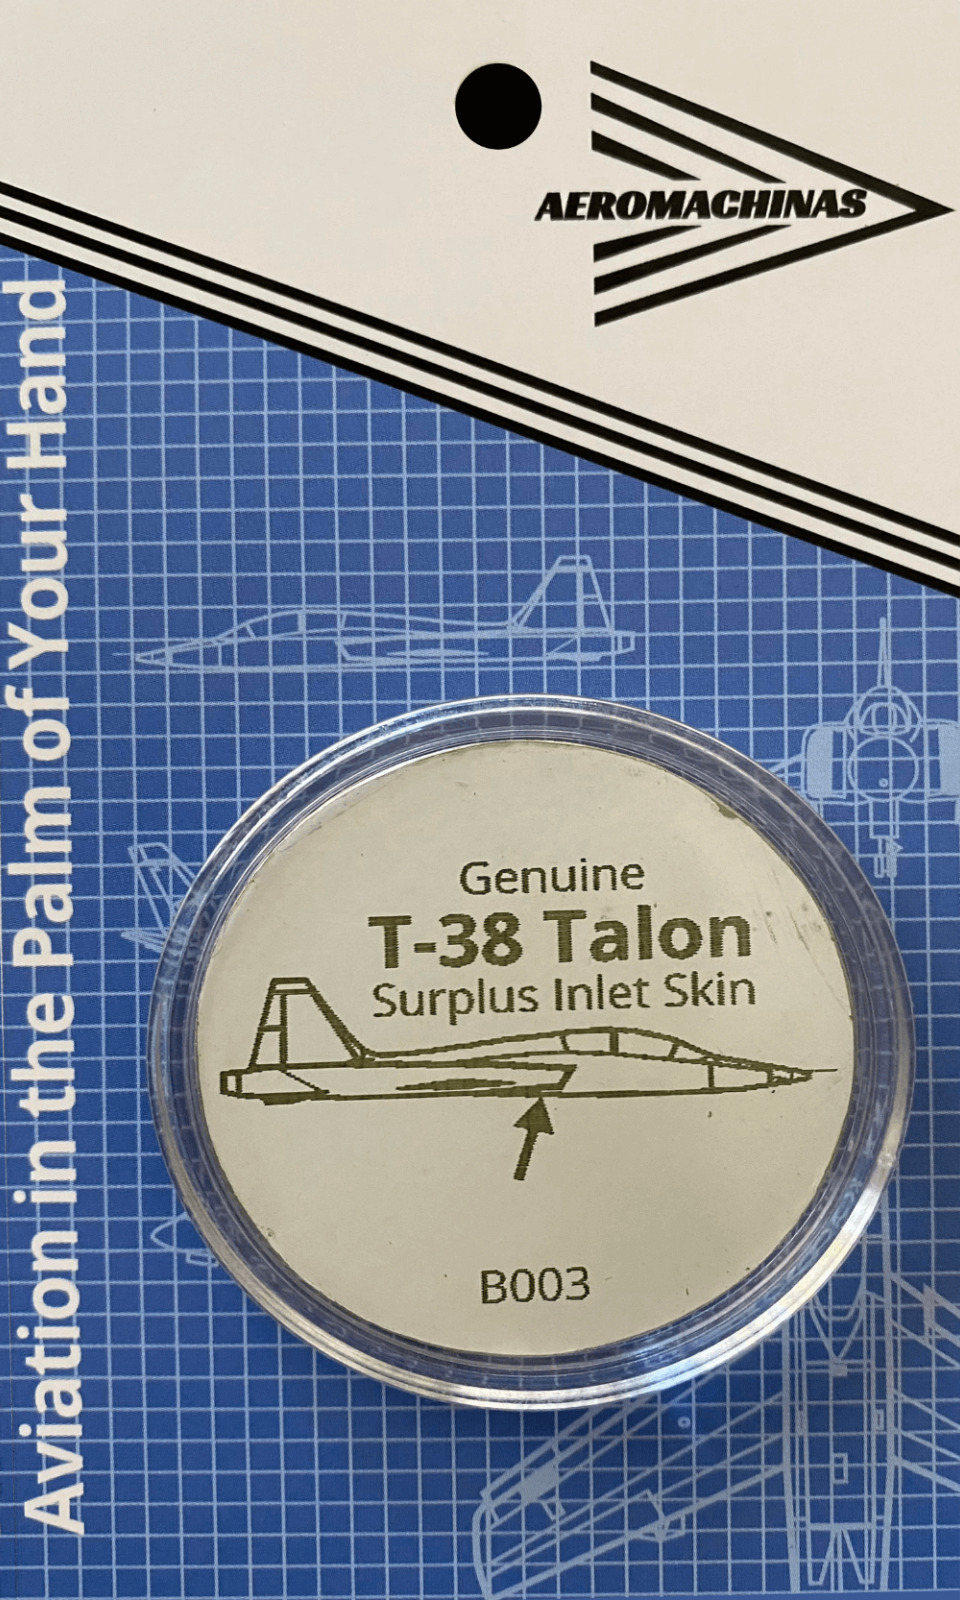 T-38 Talon Military Surplus Engine Panel Challenge Coin Real Aircraft Part